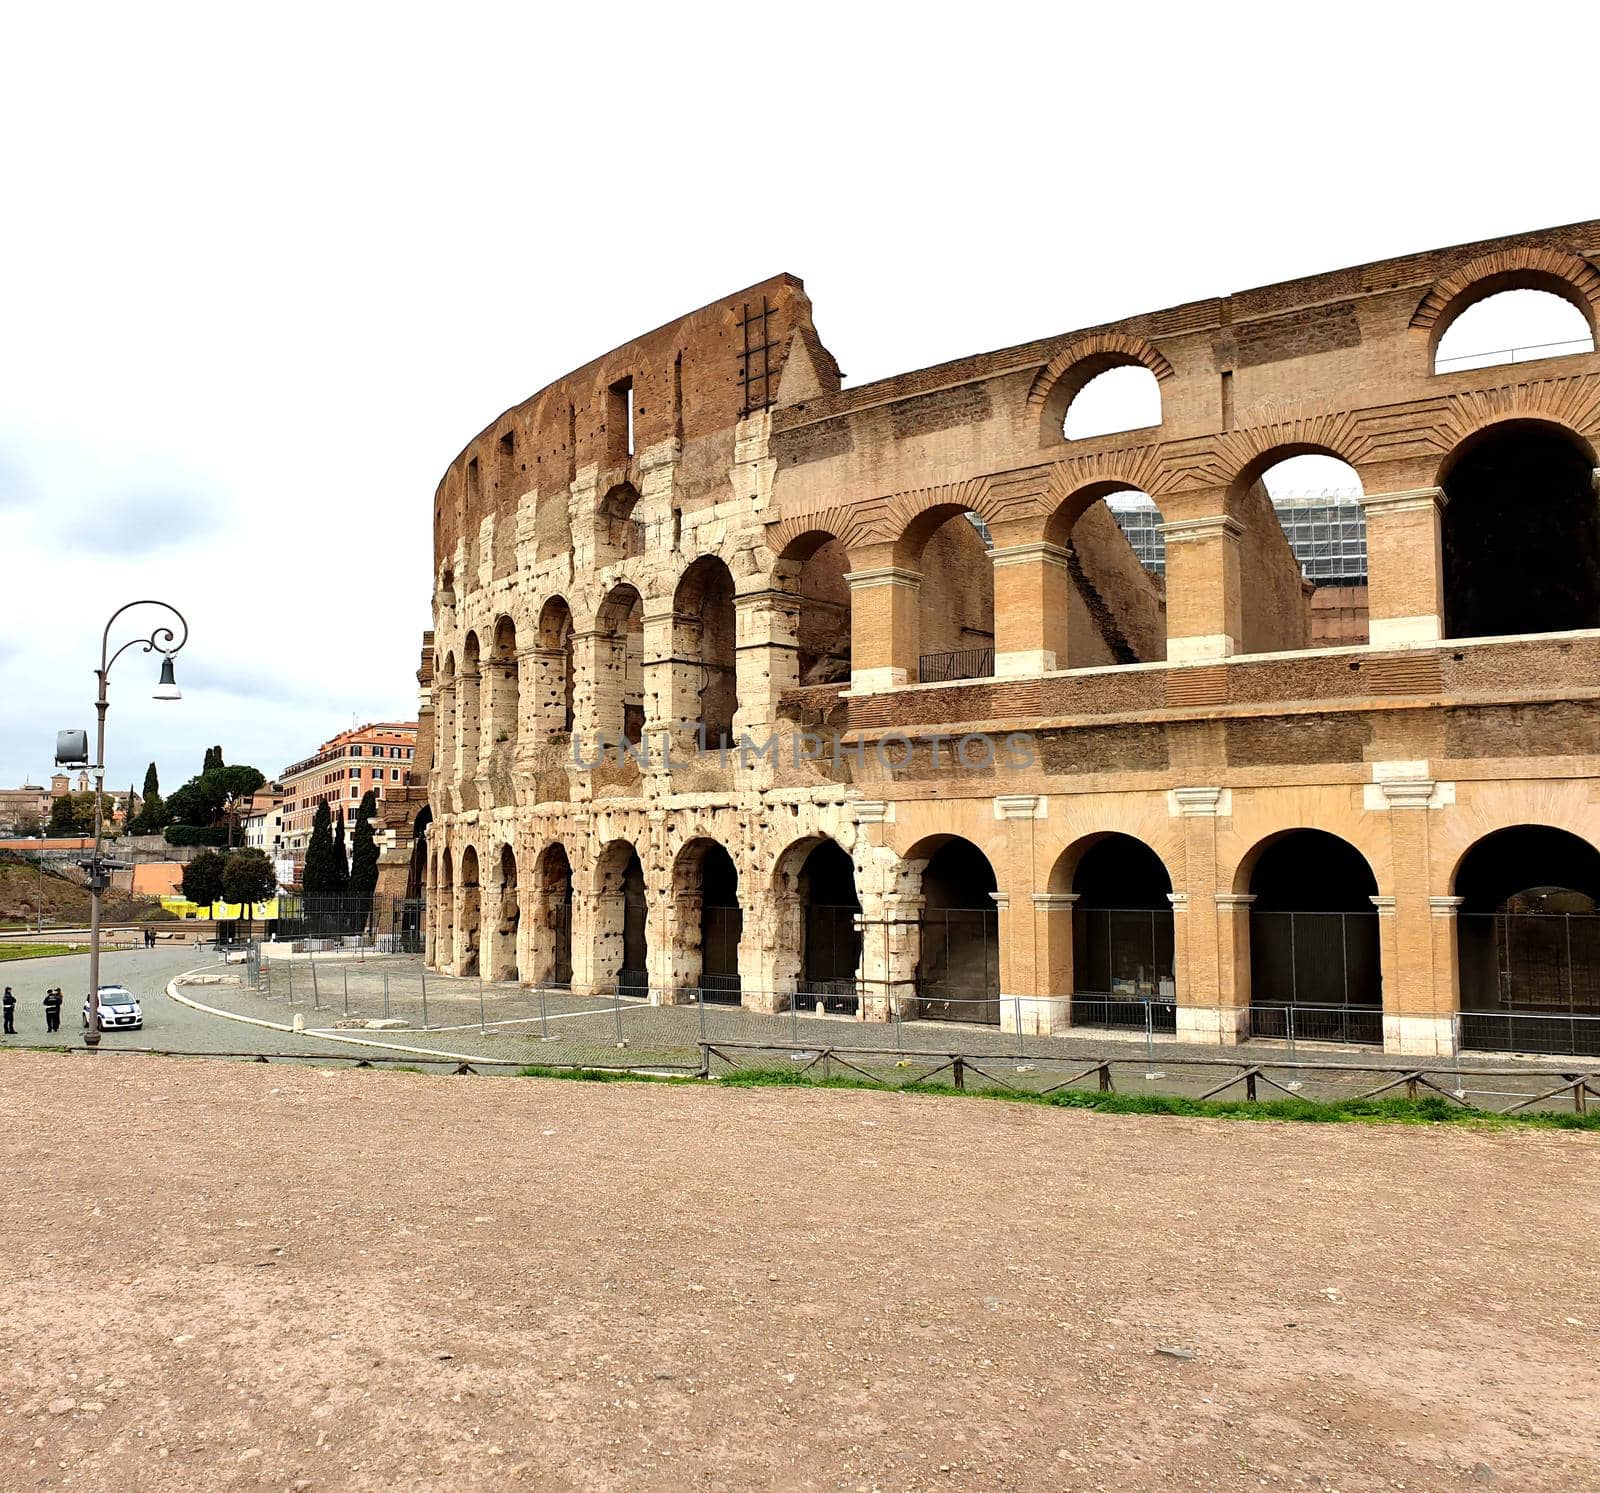 View of the Colosseum without tourists due to the quarantine by silentstock639